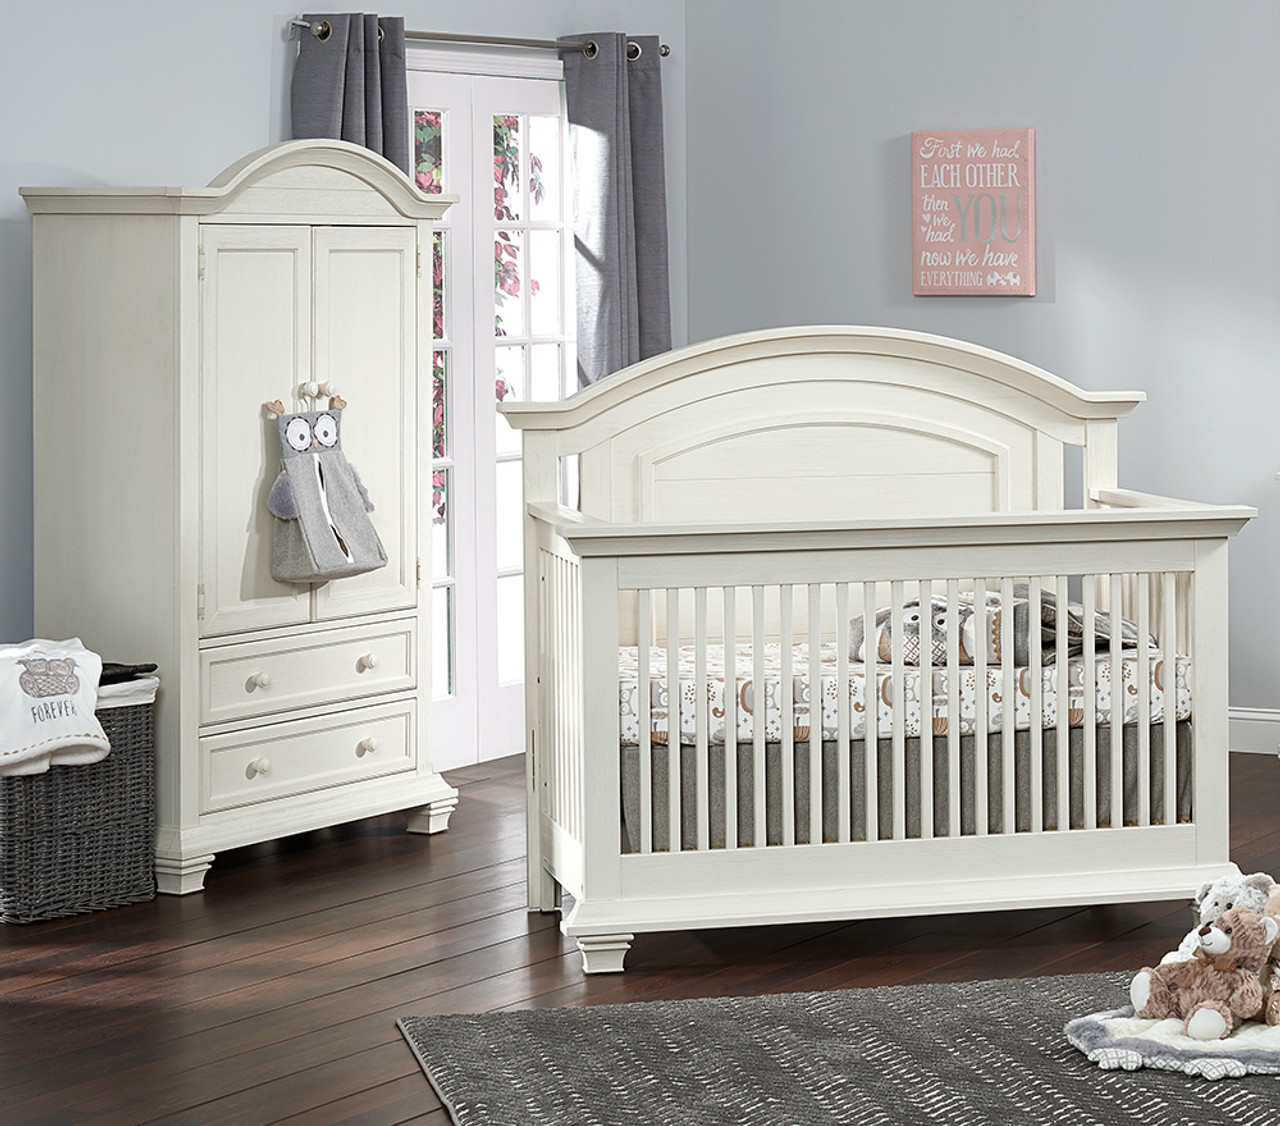 Oxford Baby Cottage Cove Collection 2 Piece Nursery Set - Convertible Crib  & Armoire in Vintage White - Bambi Baby Store